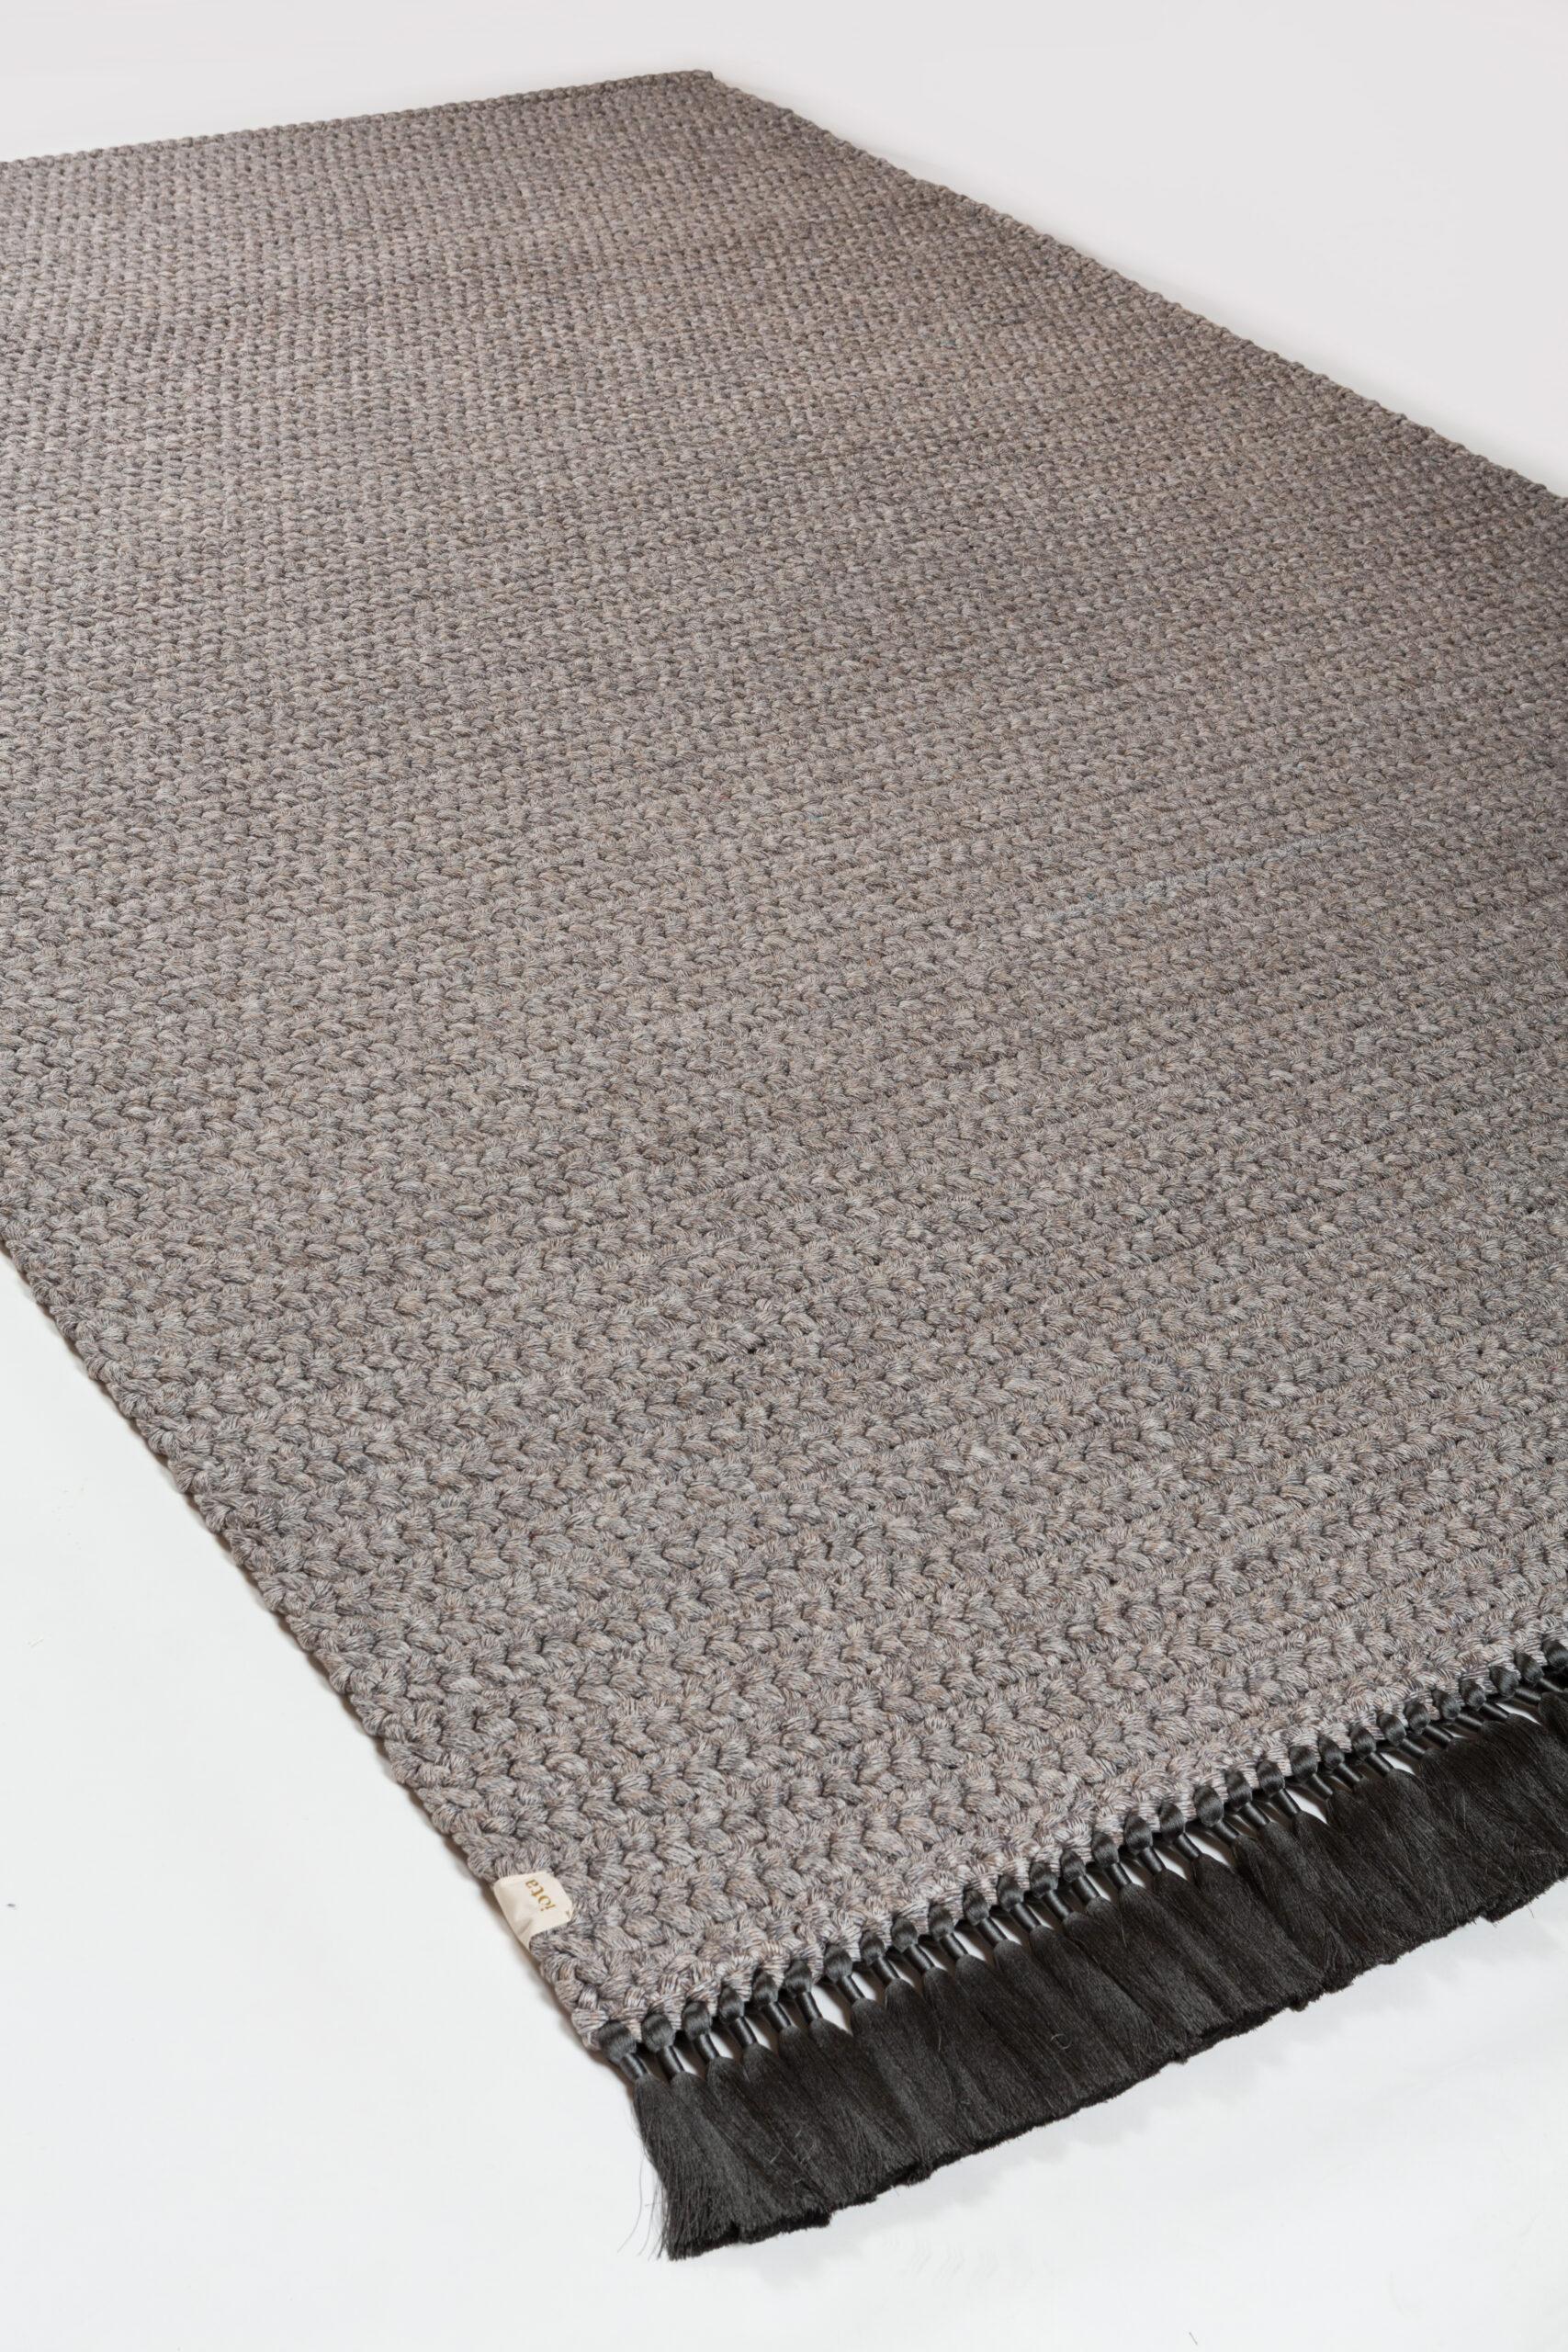 Israeli Handmade Crochet 200x300 cm Thick Rug in Grey and Cacao Colors For Sale